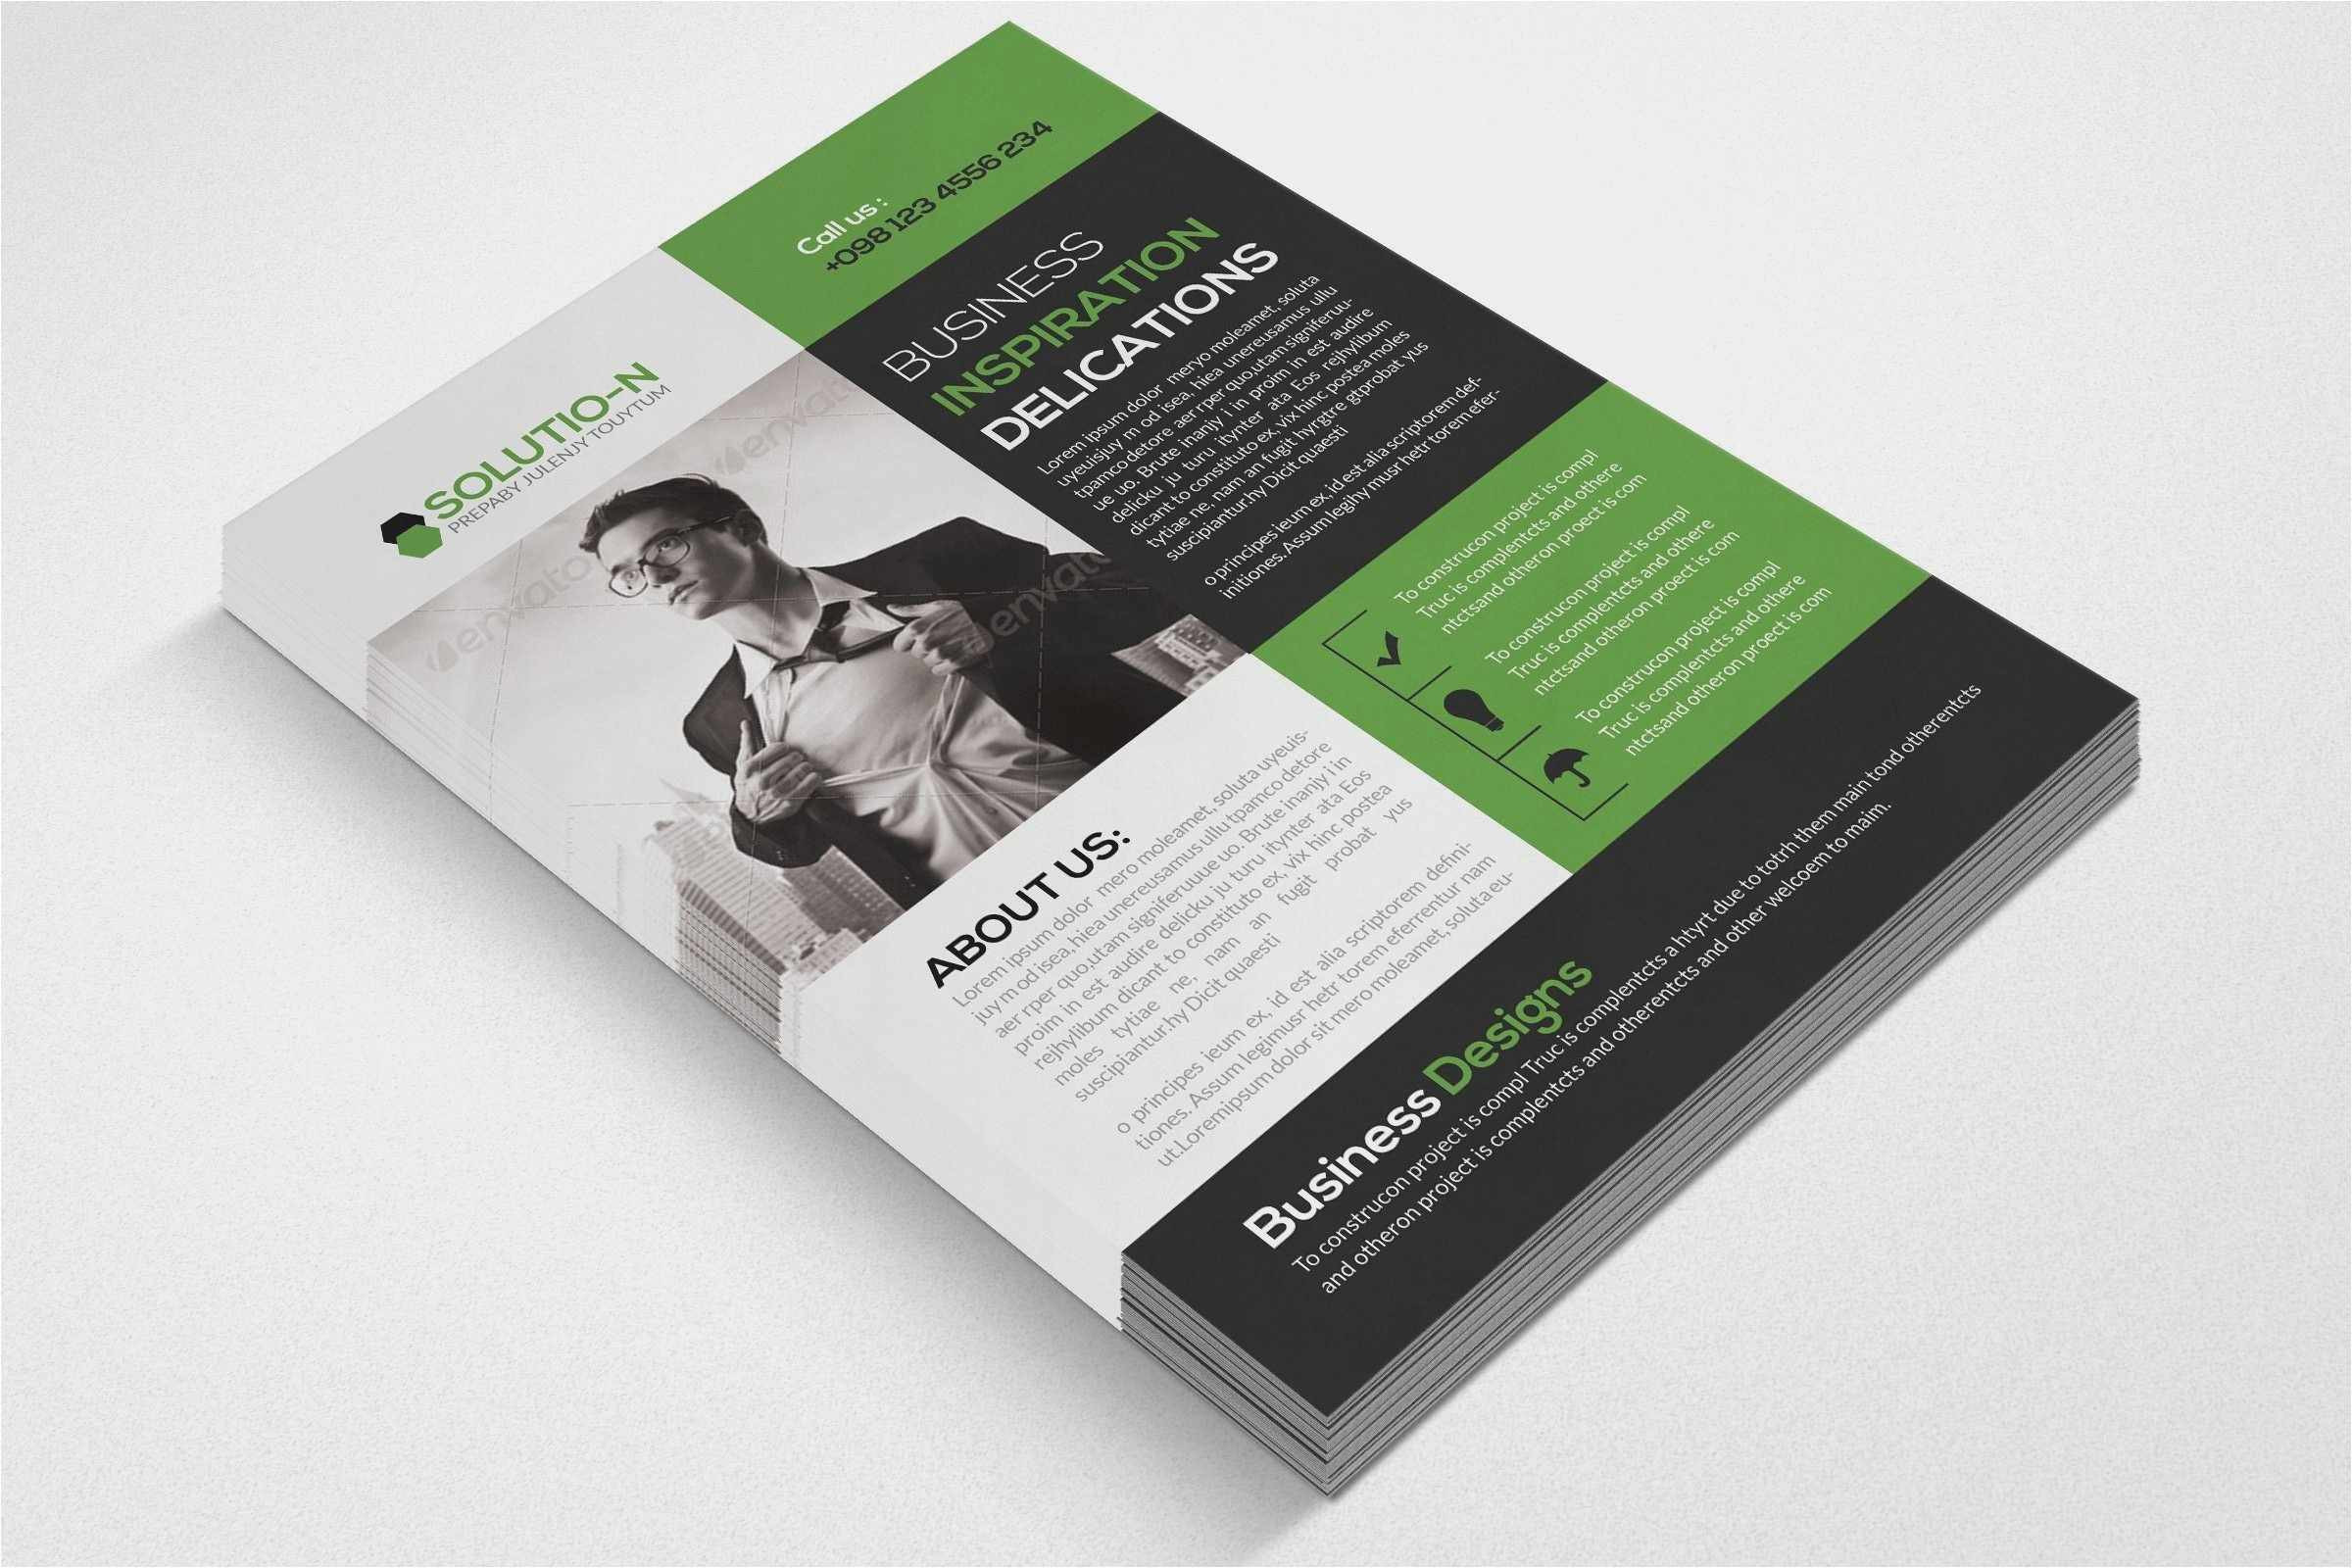 Free Download 58 Presentation Template Design Professional Of Business Card Presentation Template